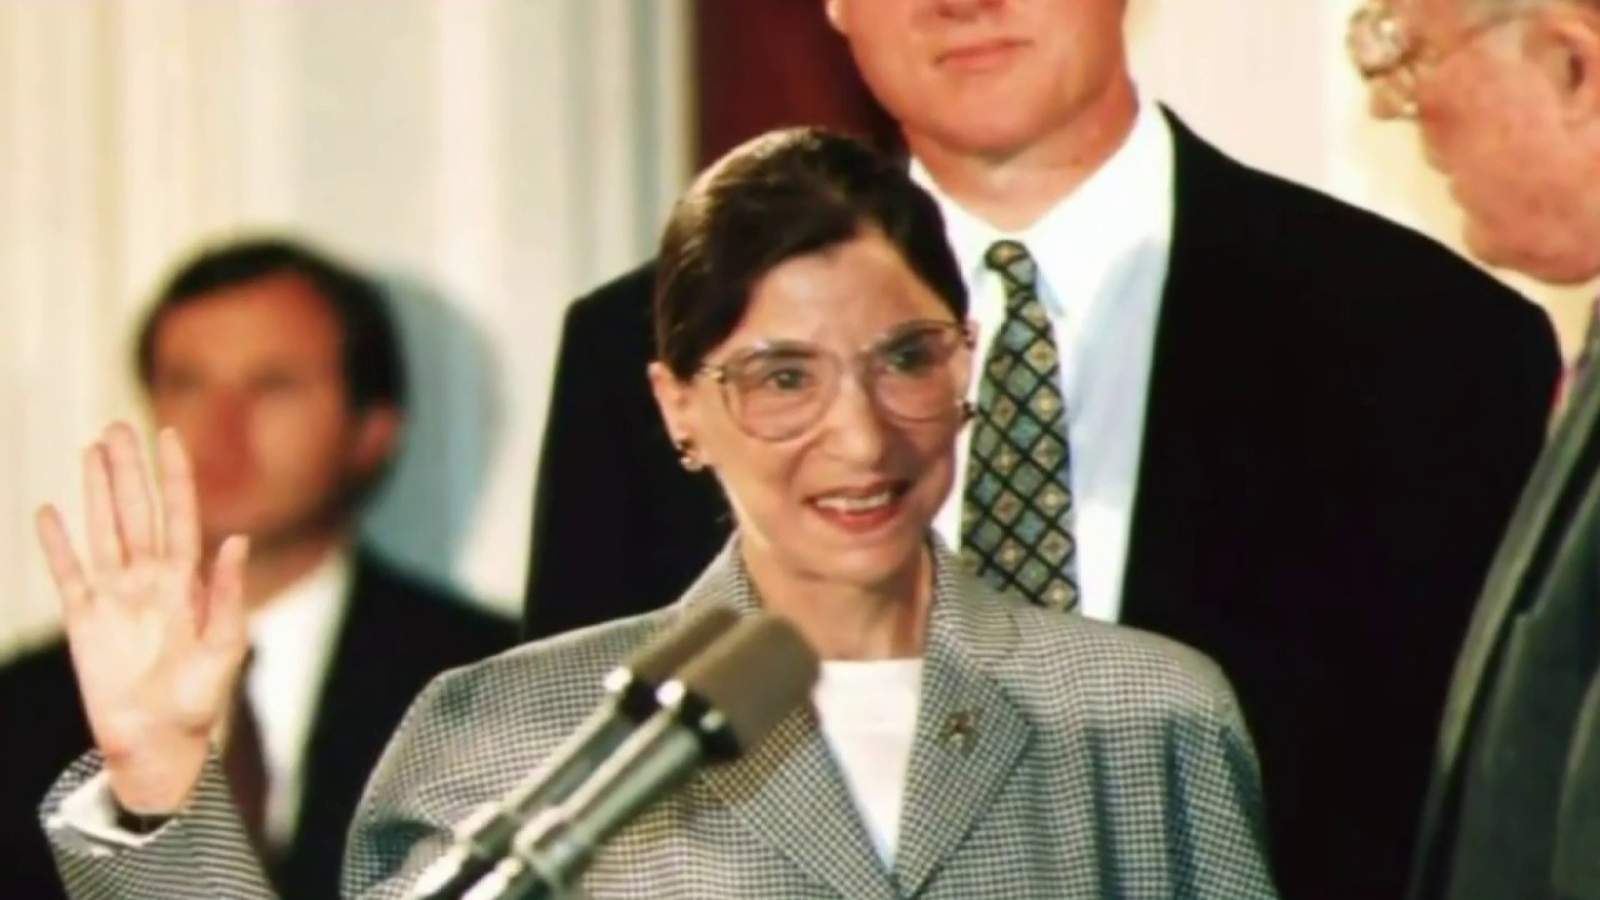 Michigan health director recounts Ginsburg: ‘Fierce defender of equality, a brilliant jurist’